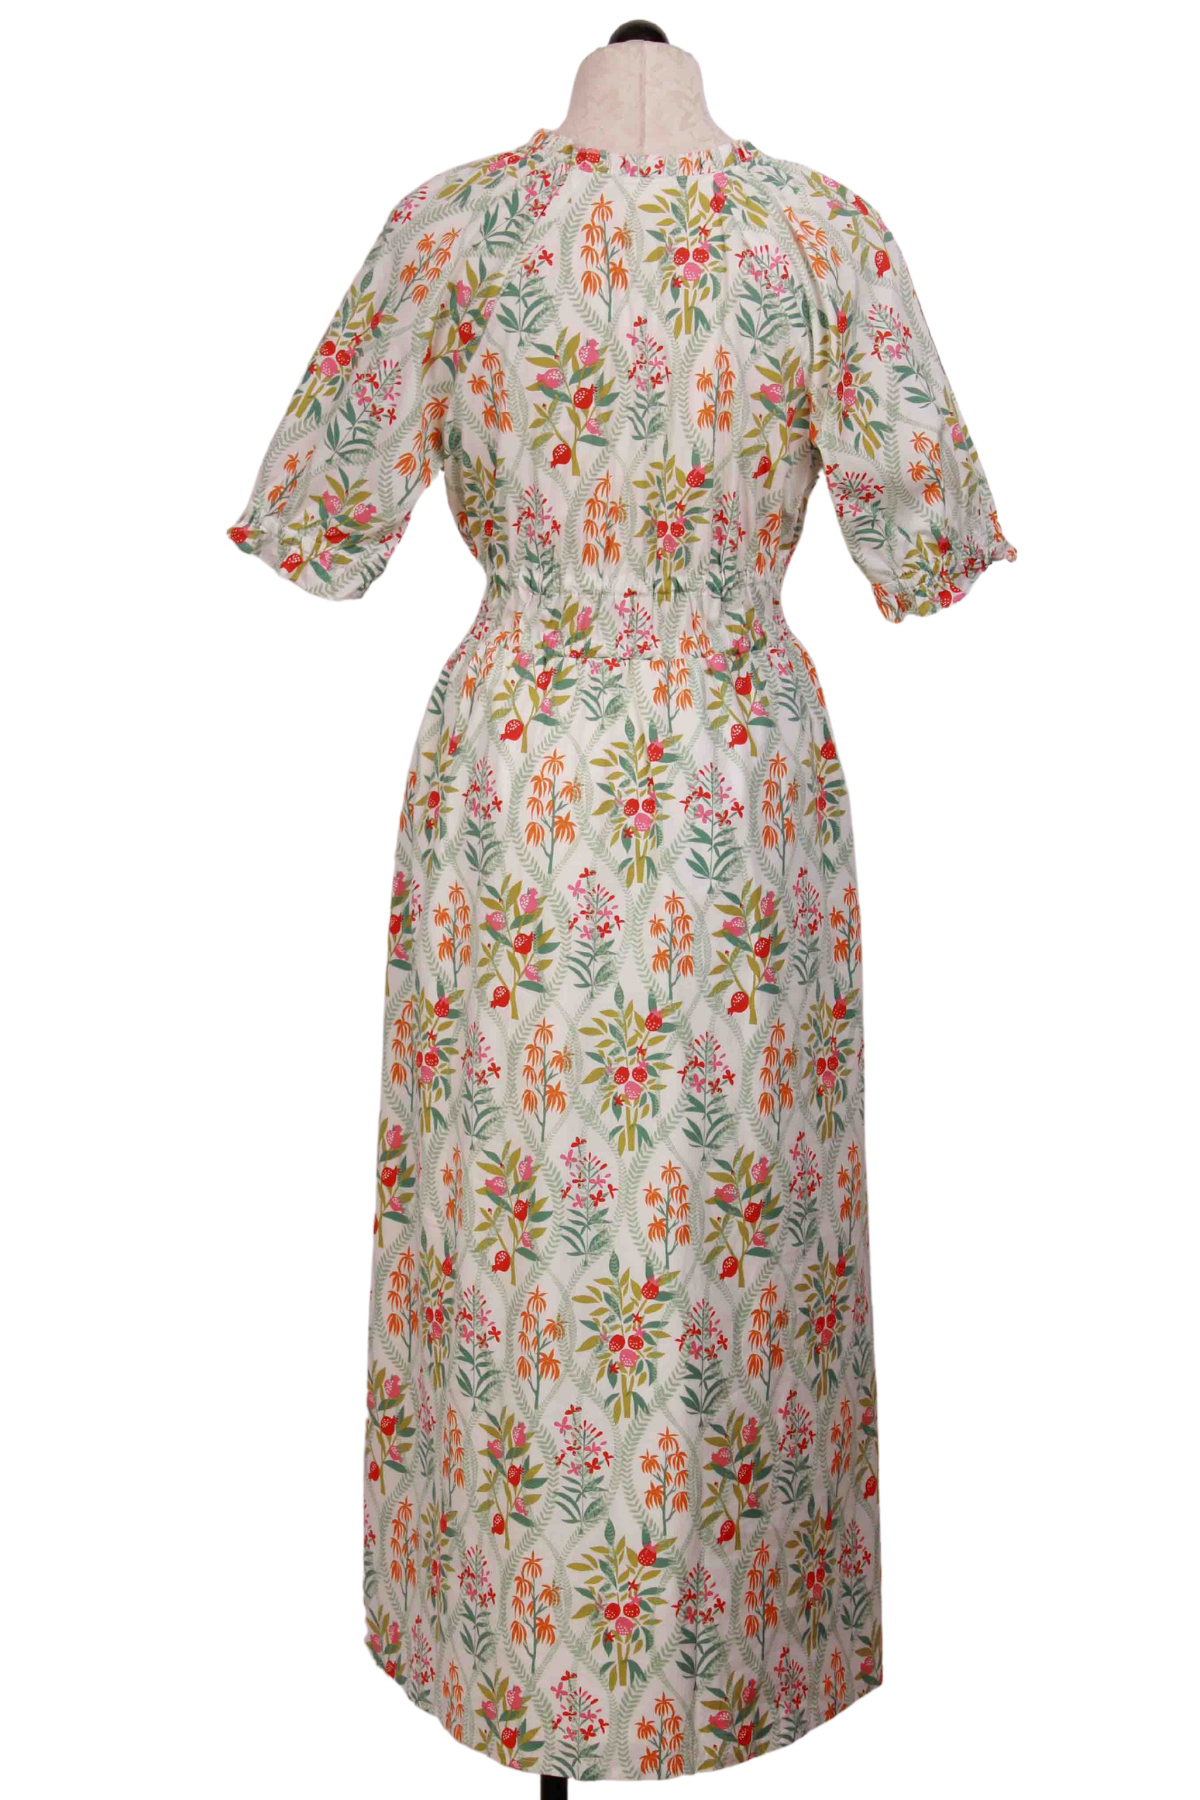 back view of Queenie Topiary White Floral Joanie Midi Length Dress by Spartina